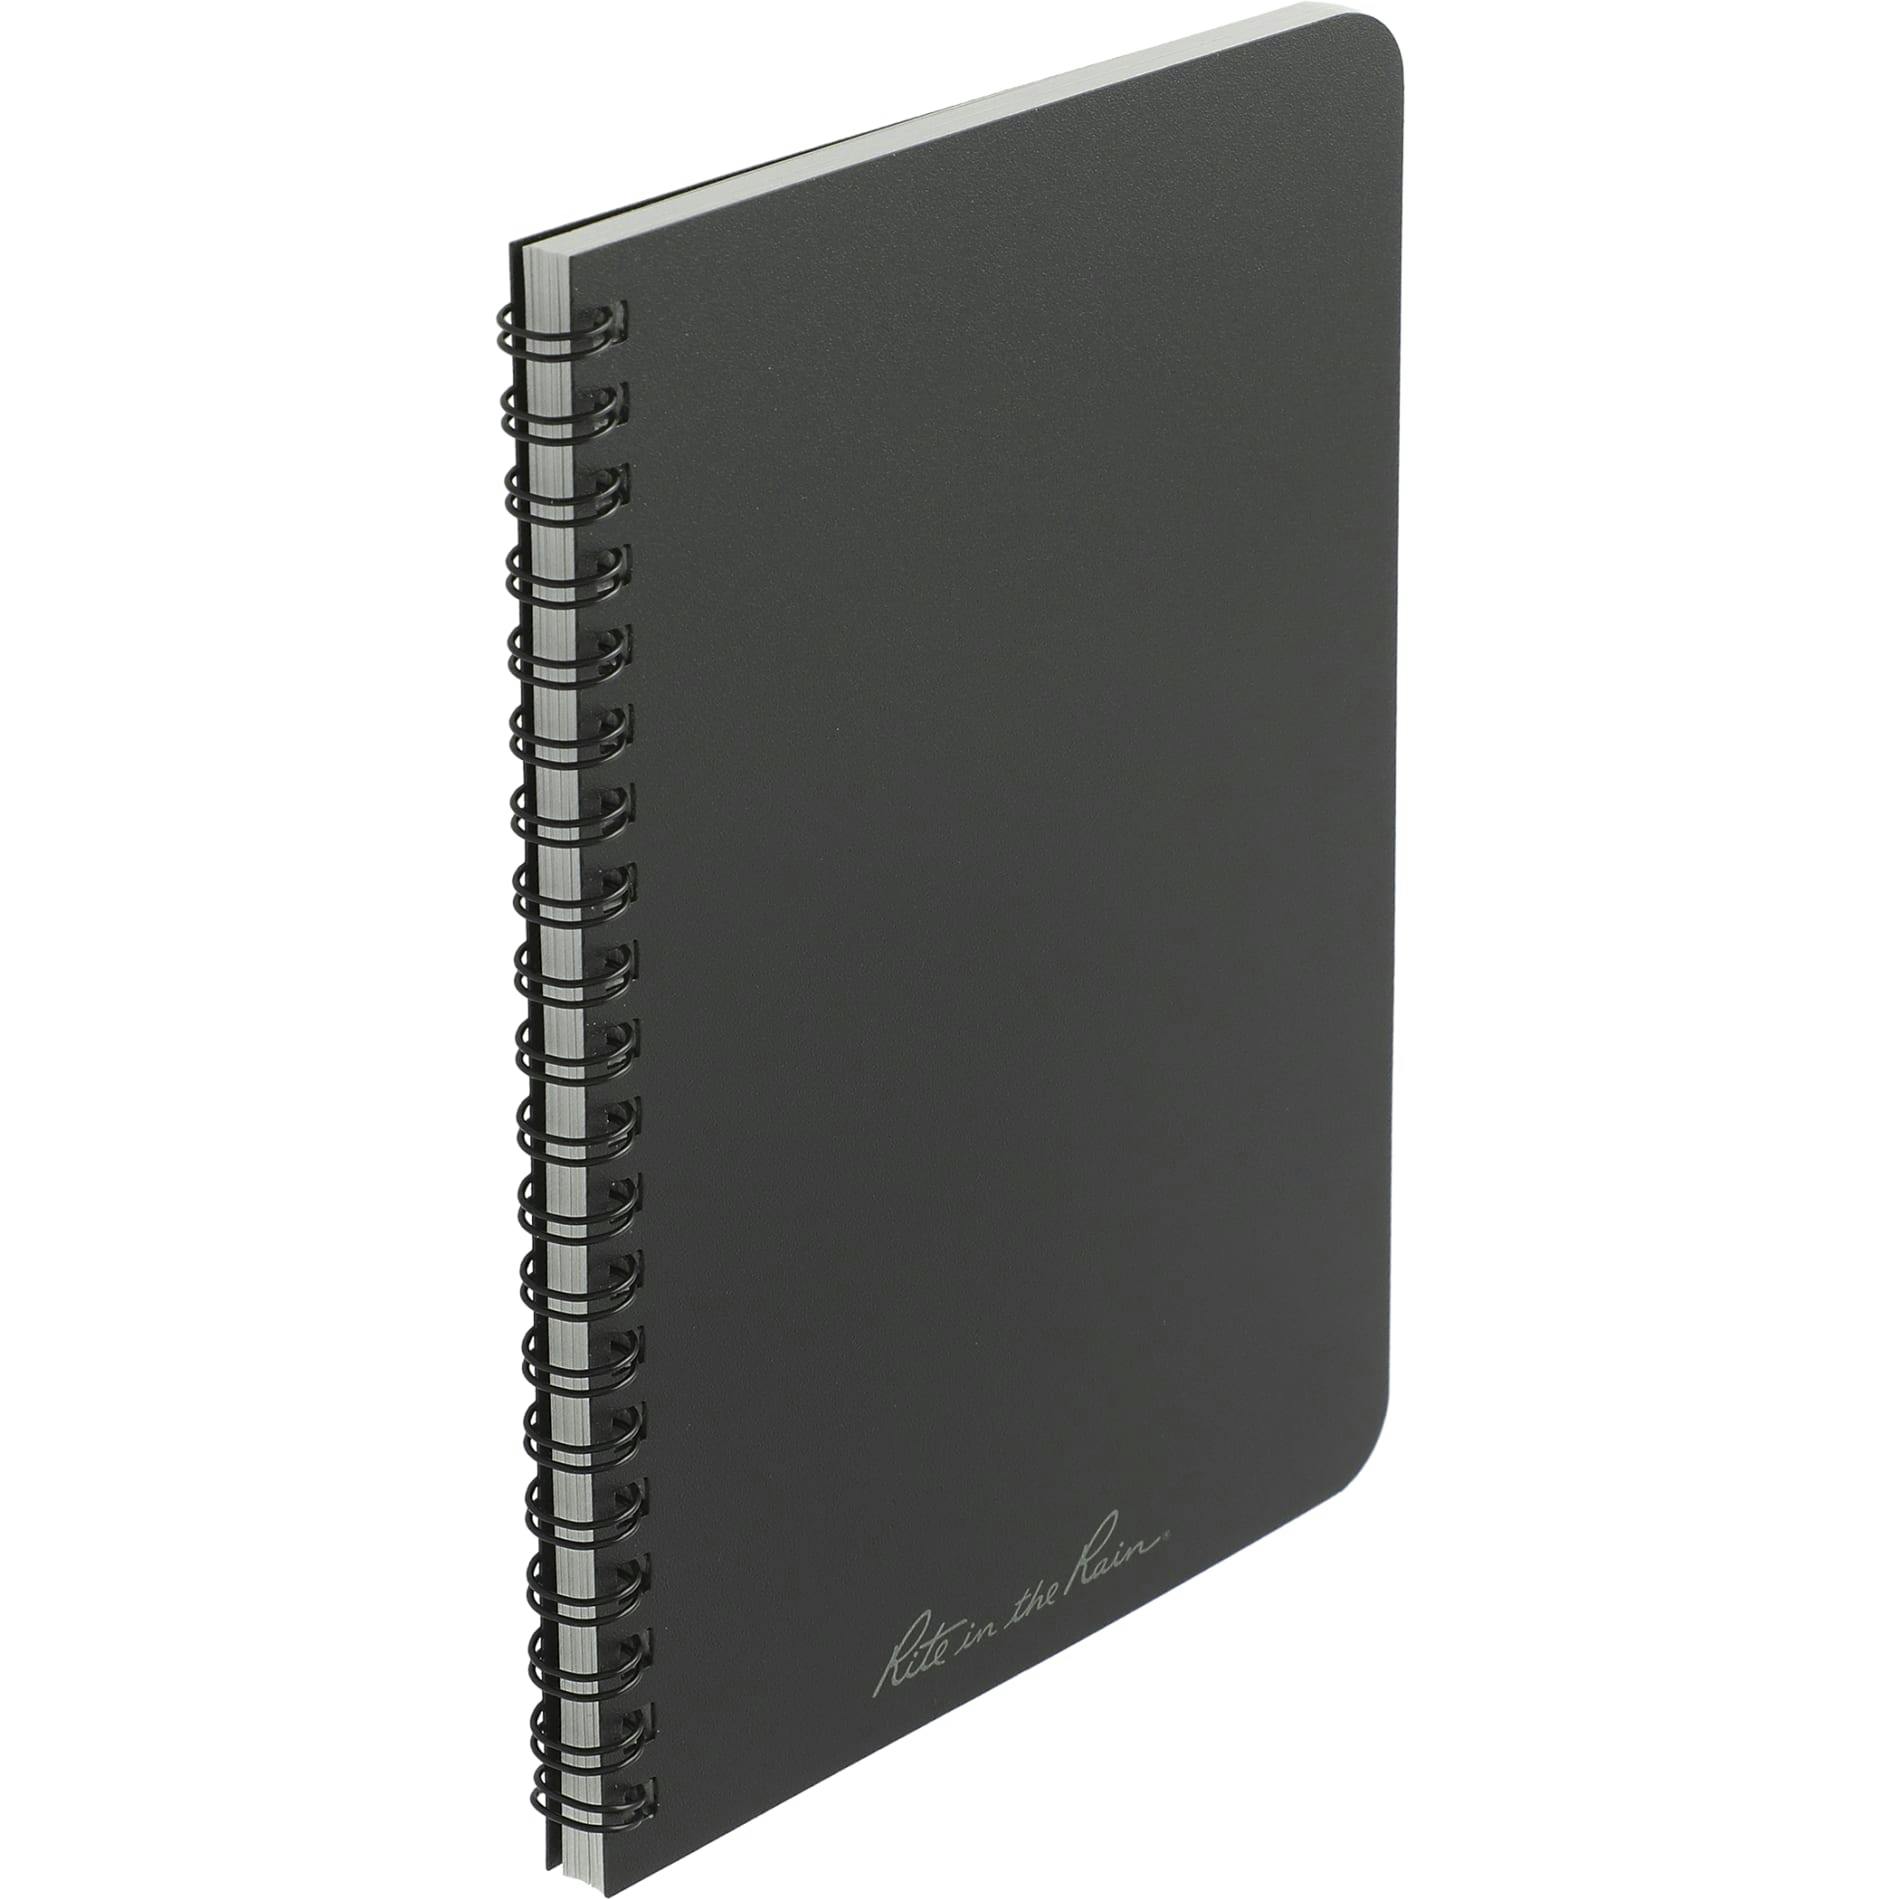 4.6” x 7” Rite in the Rain Side Spiral Notebook - additional Image 3